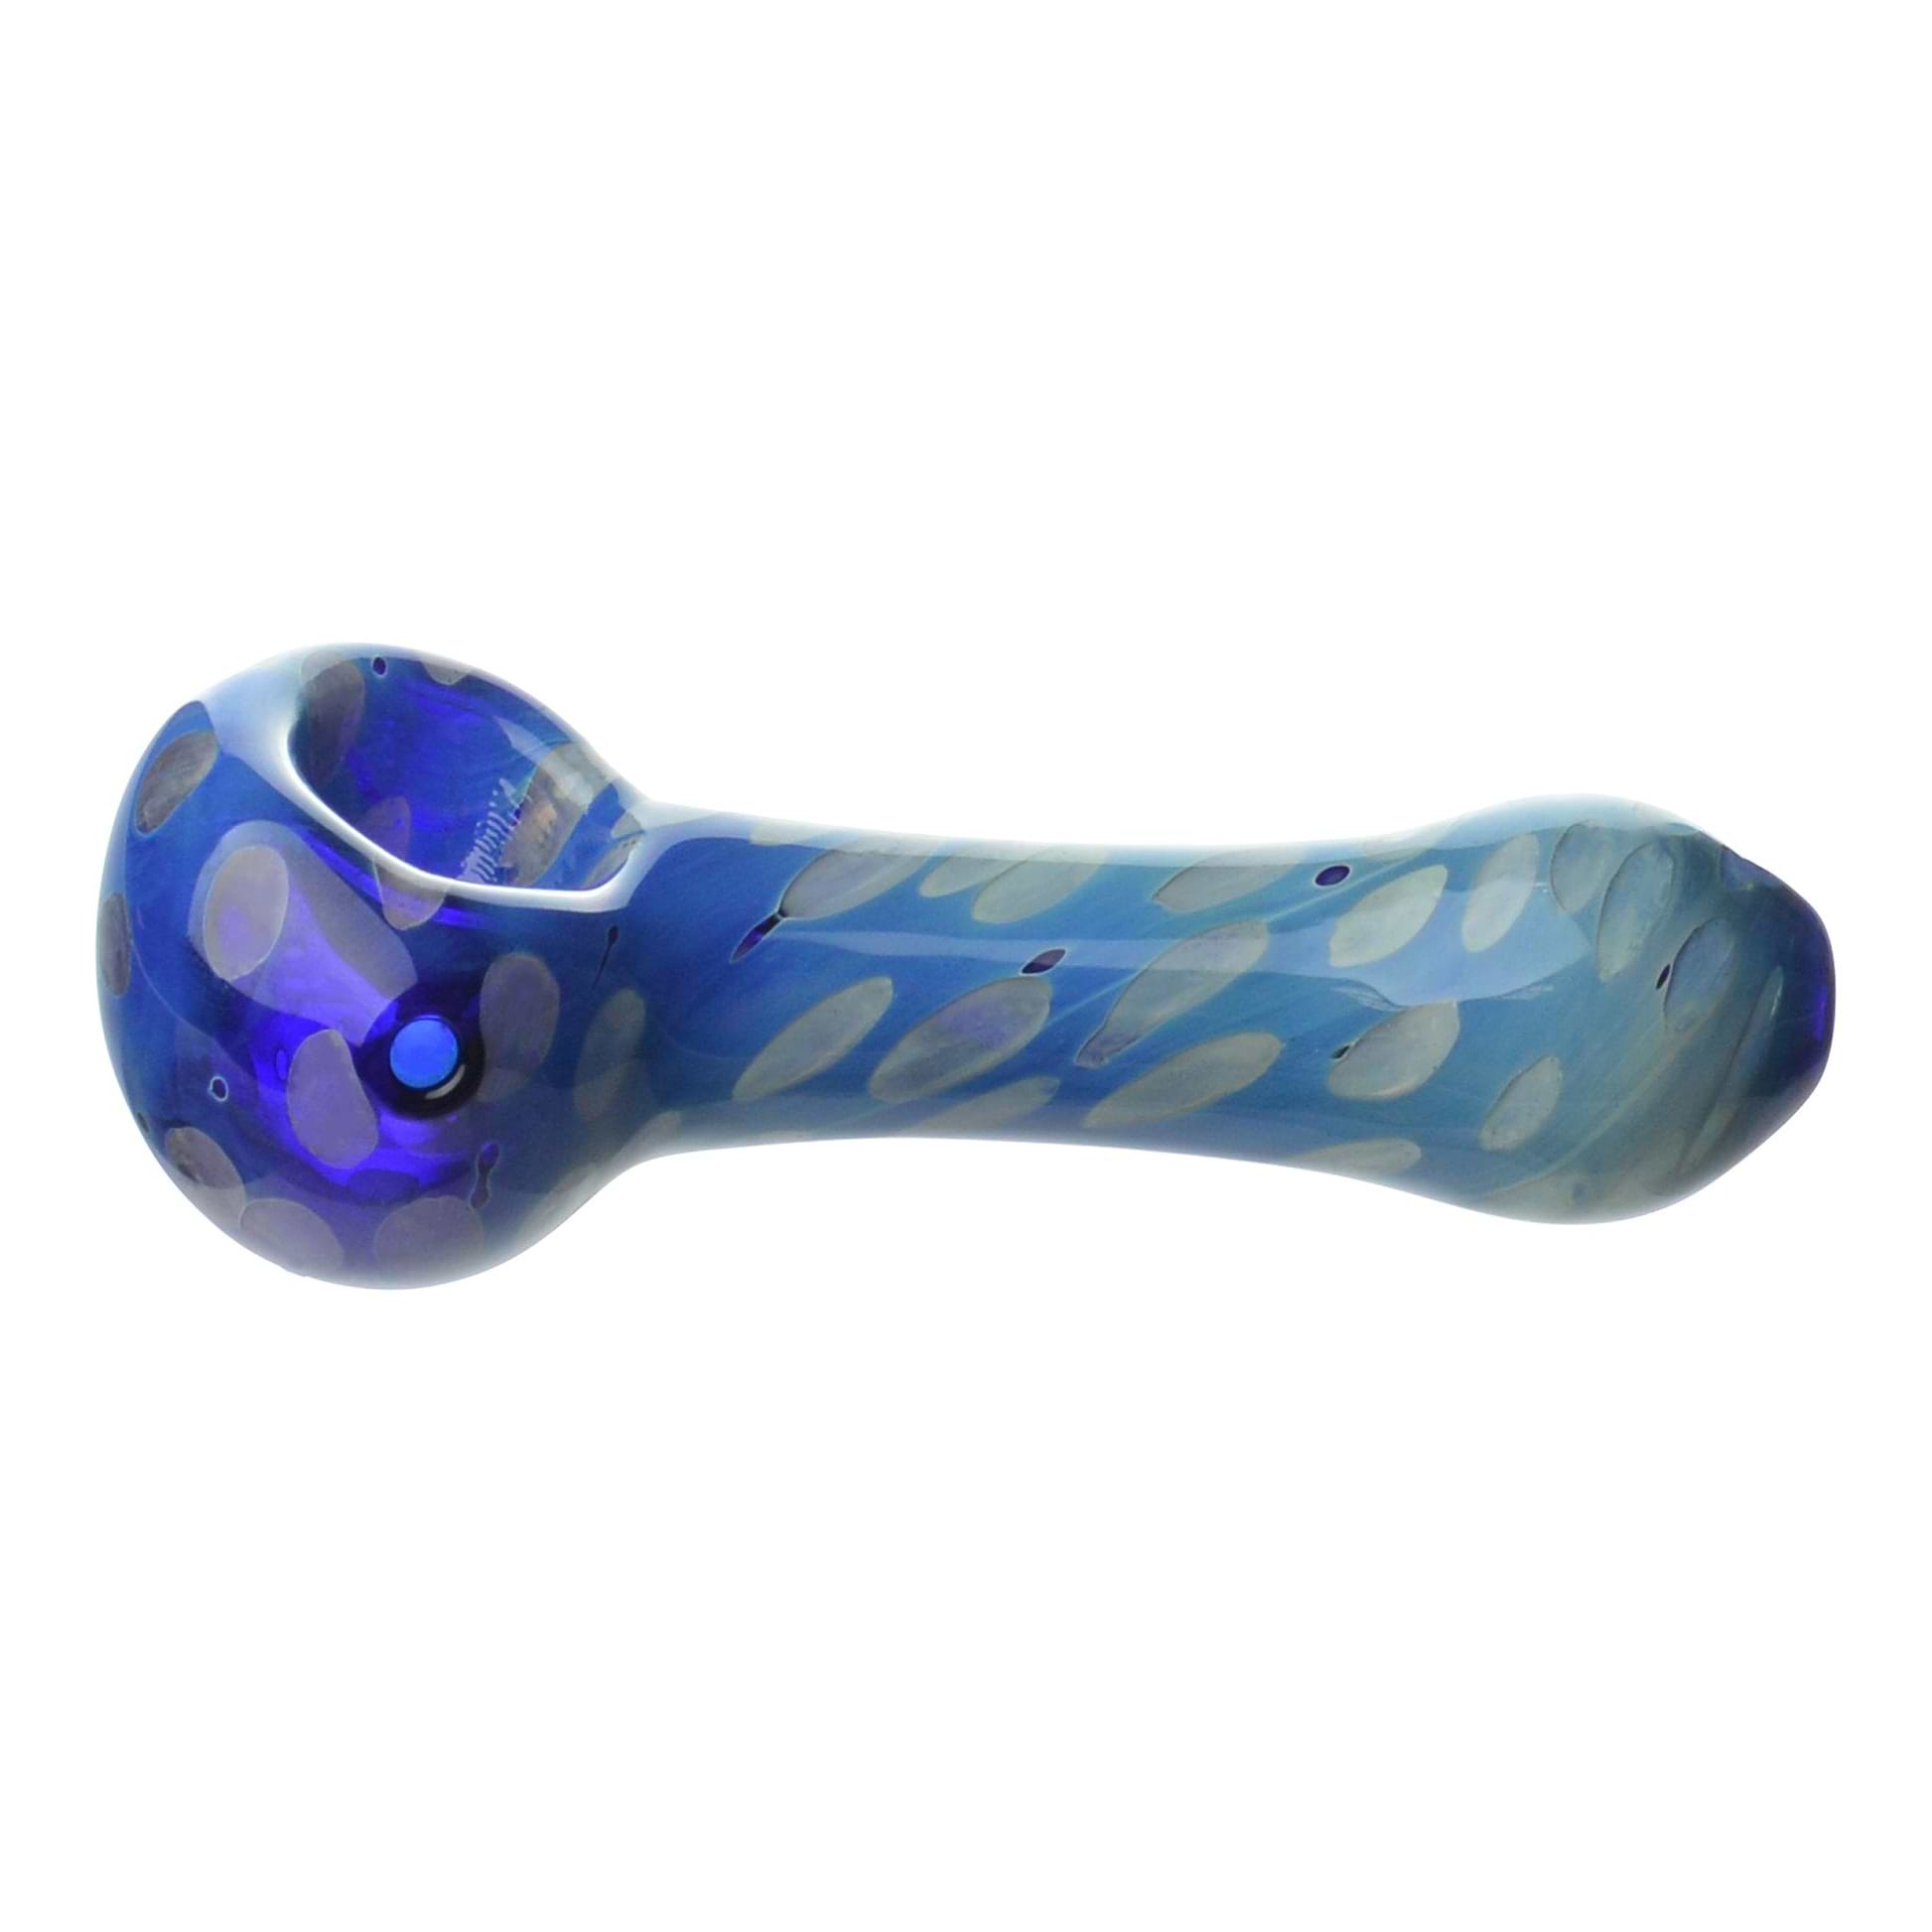 The Fish Scale Pipe - 4in